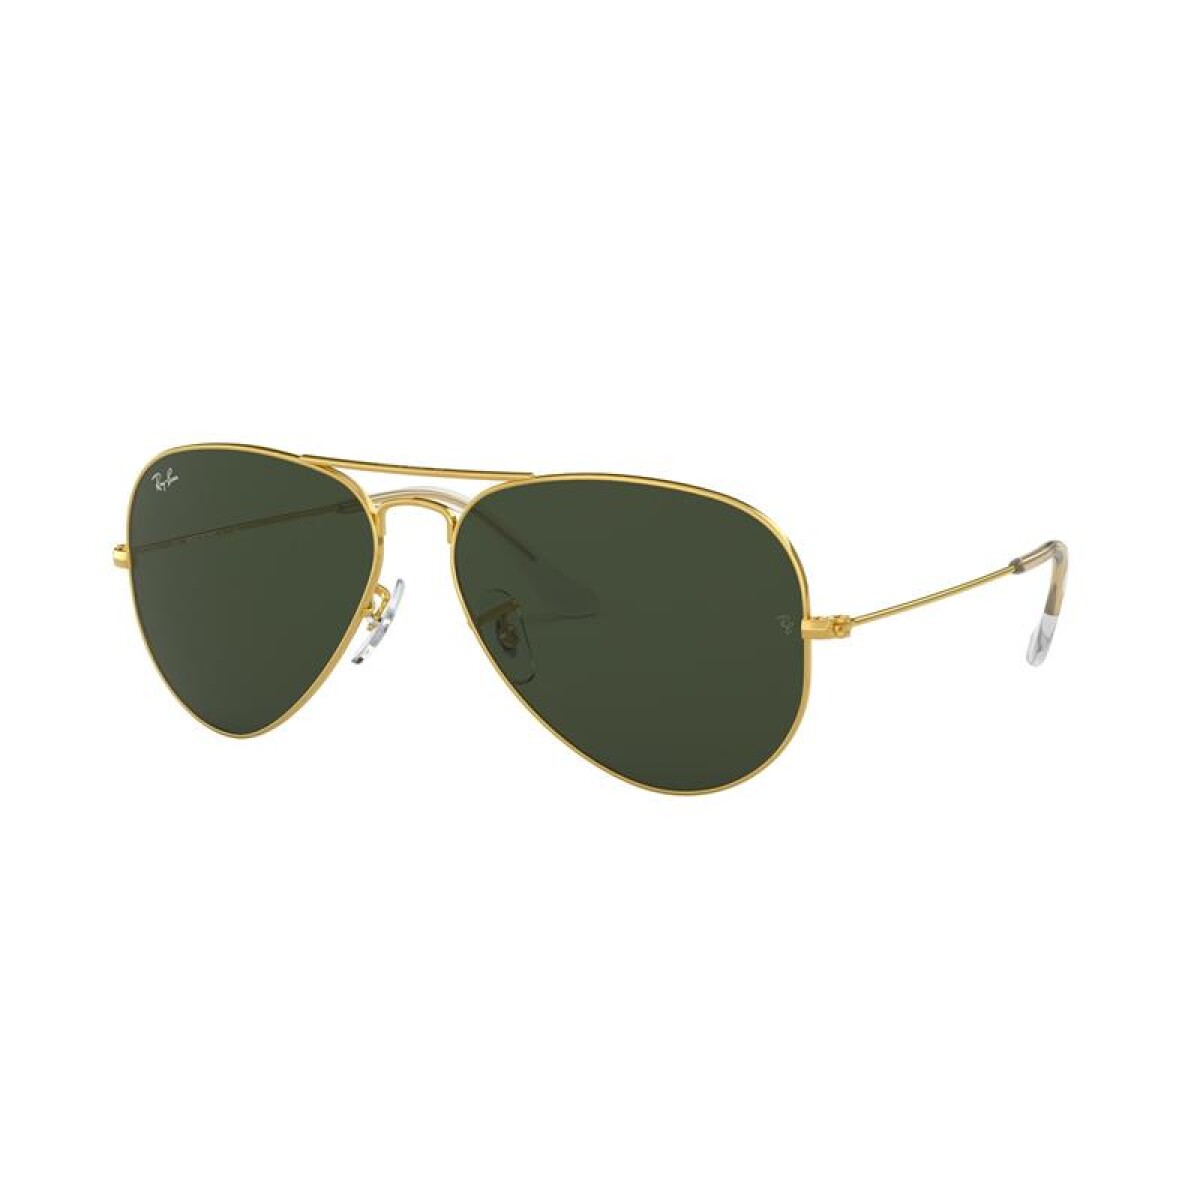 Ray Ban Rb3025 - W3234 